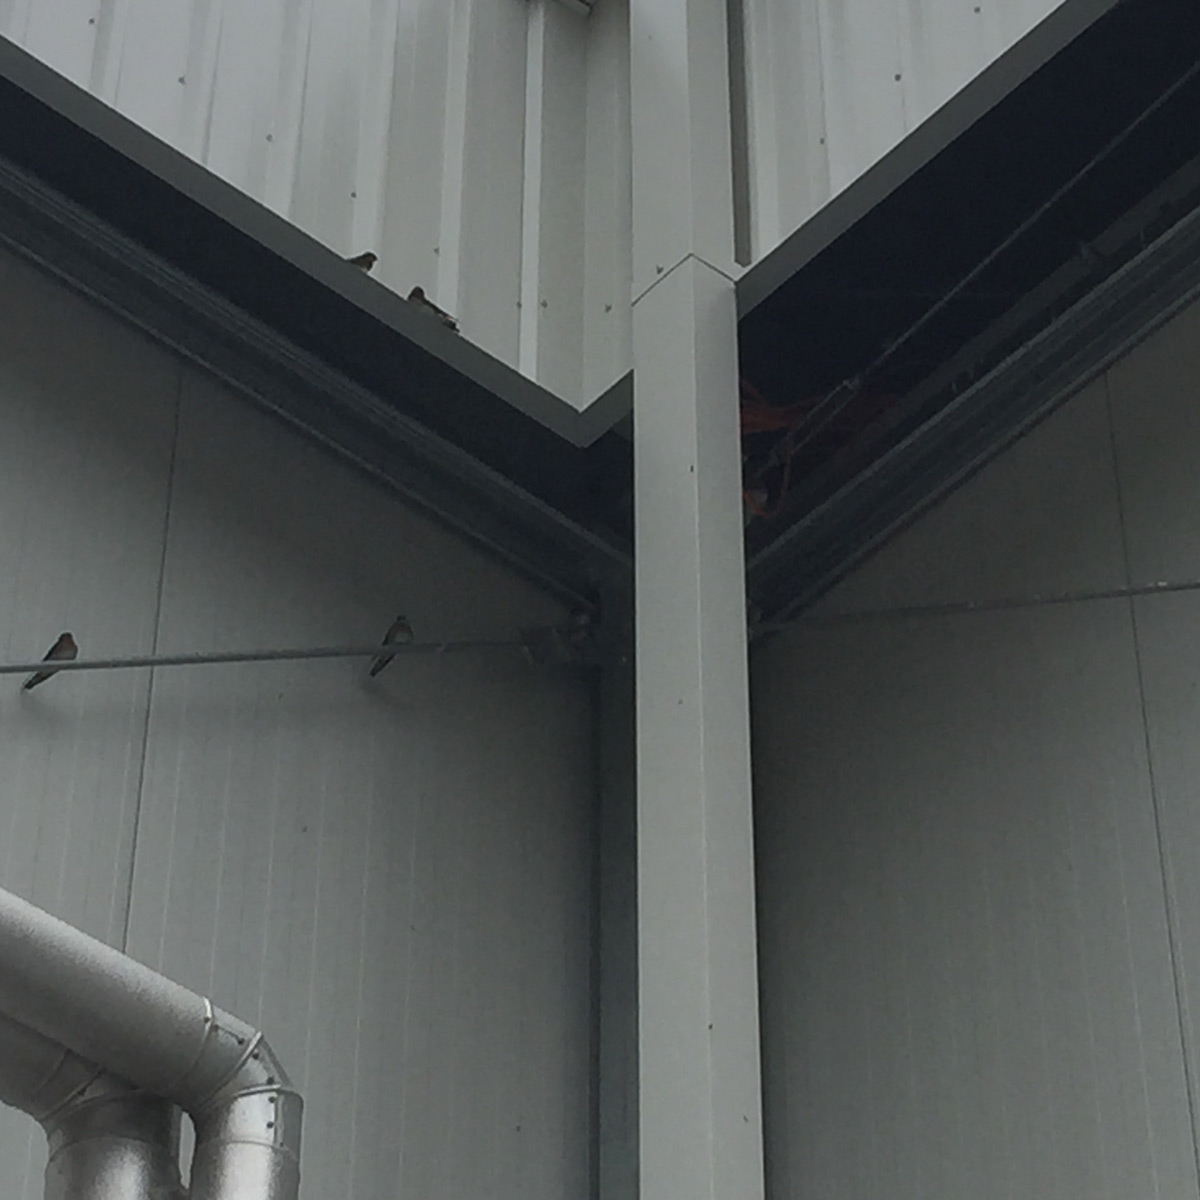 Cure All Pest Control – Warehouse Bird Proofing: Netting, Spikes, Removal & Shock Systems